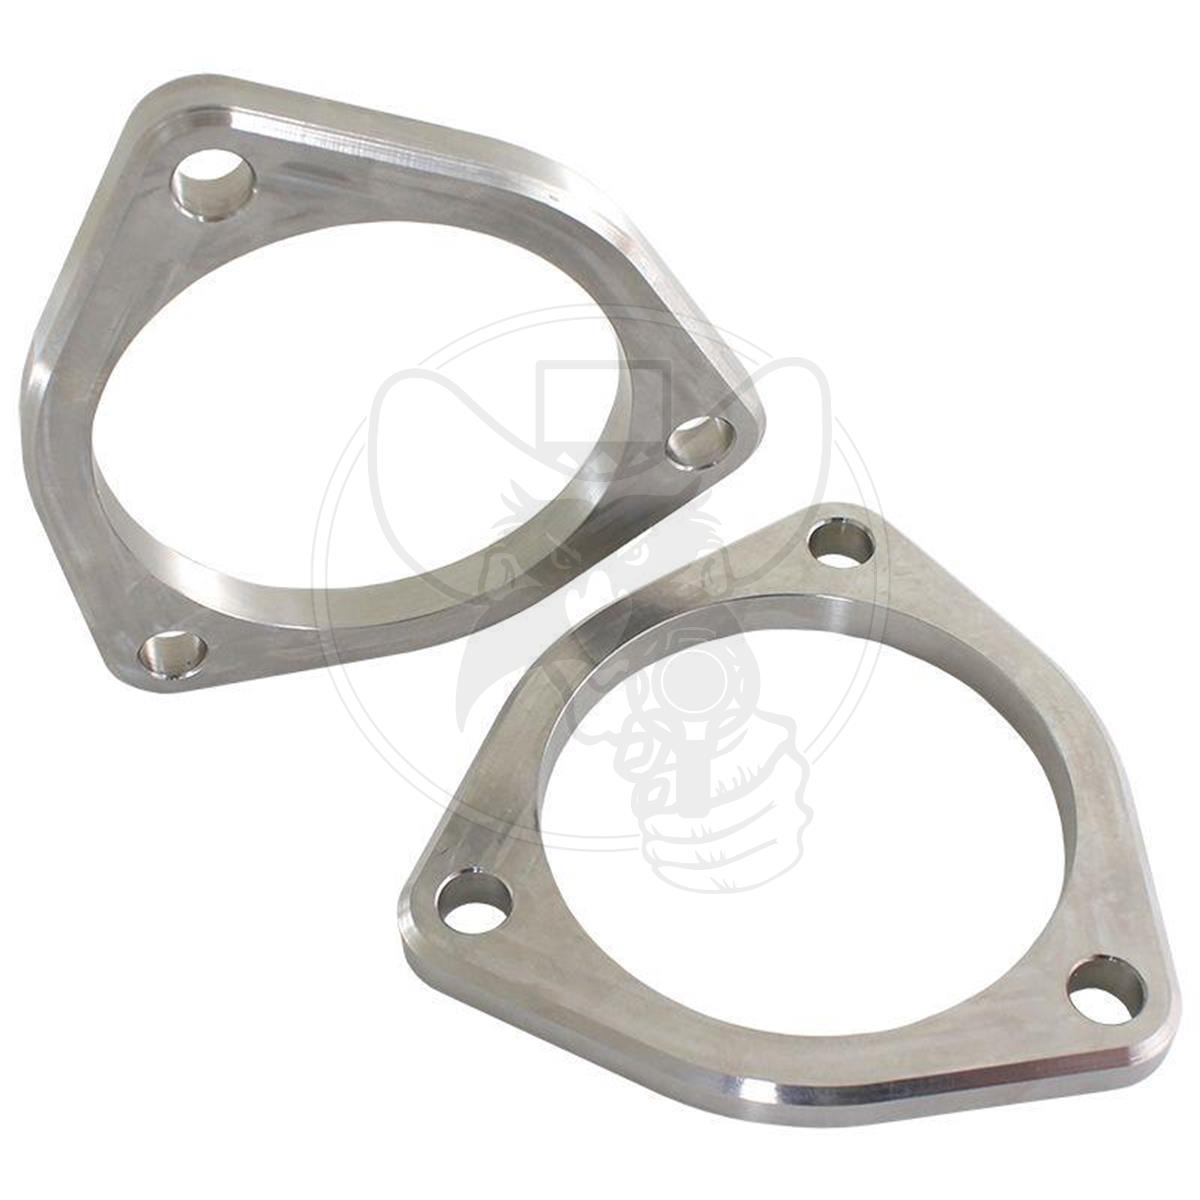 AEROFLOW 3-BOLT STAINLESS EXHAUST FLANGE 3.0" ID X 3/8" THICK